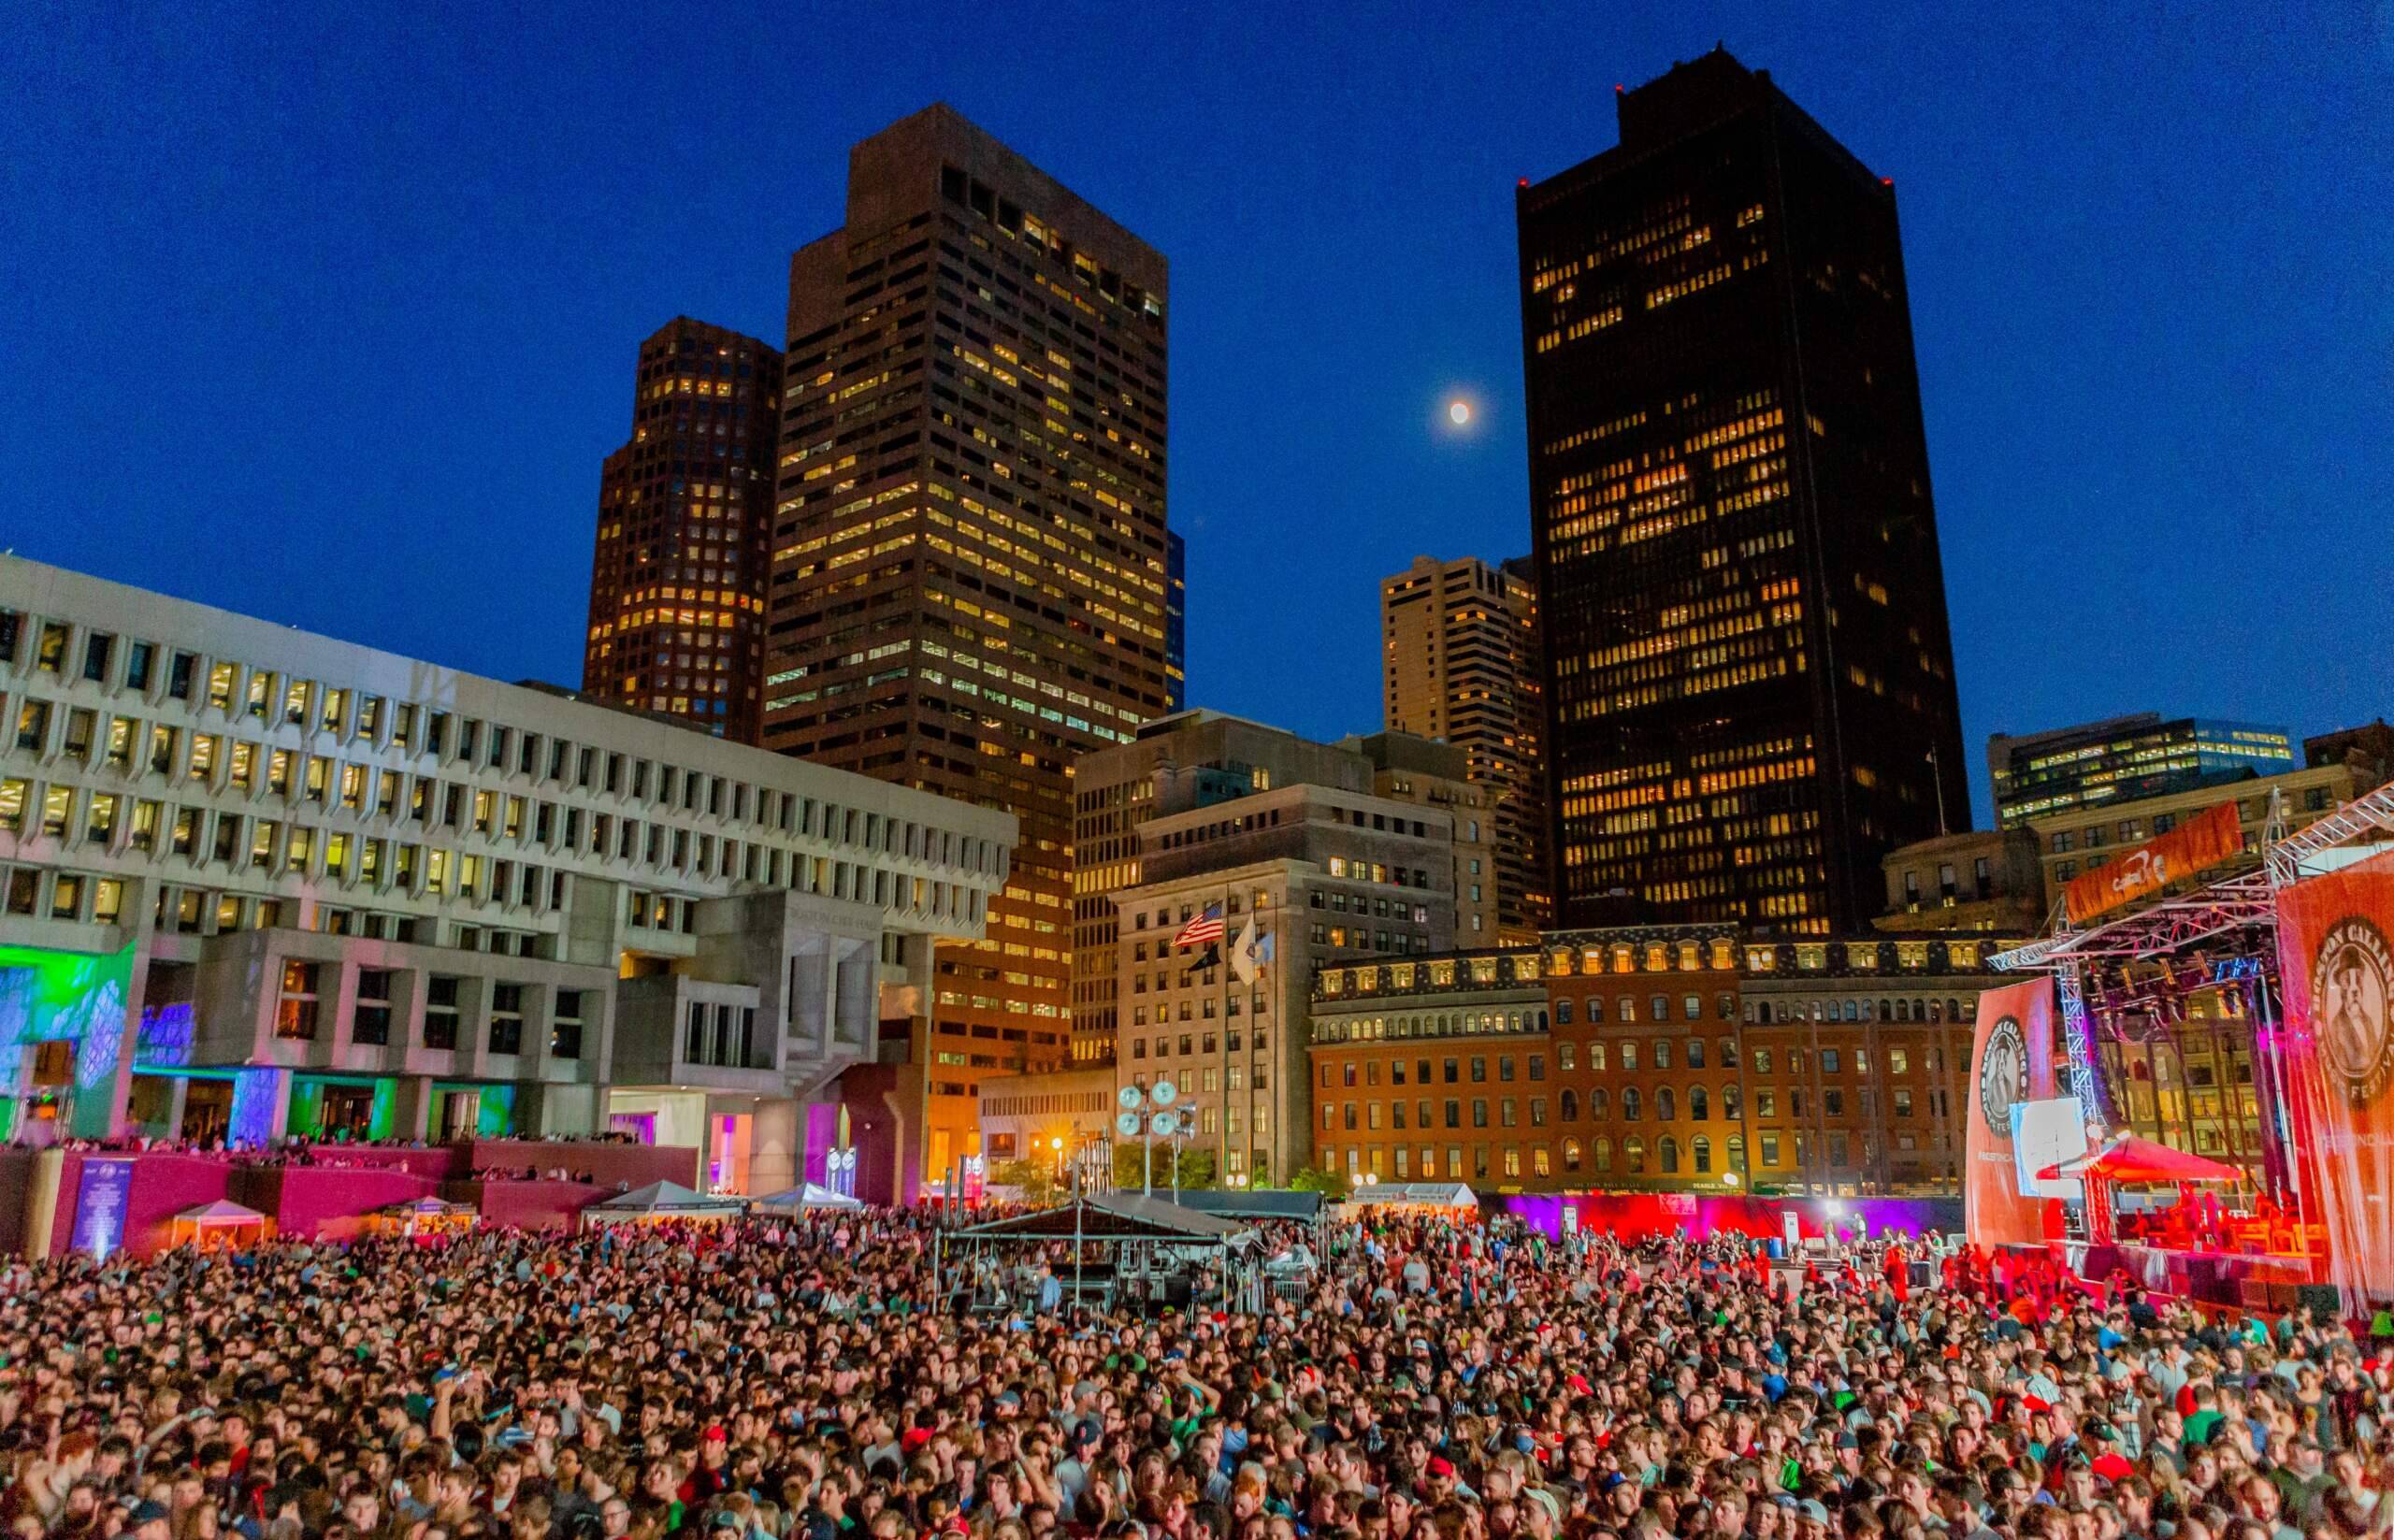 Attendees of Boston Calling in September 2014. (Courtesy Mike Diskin)